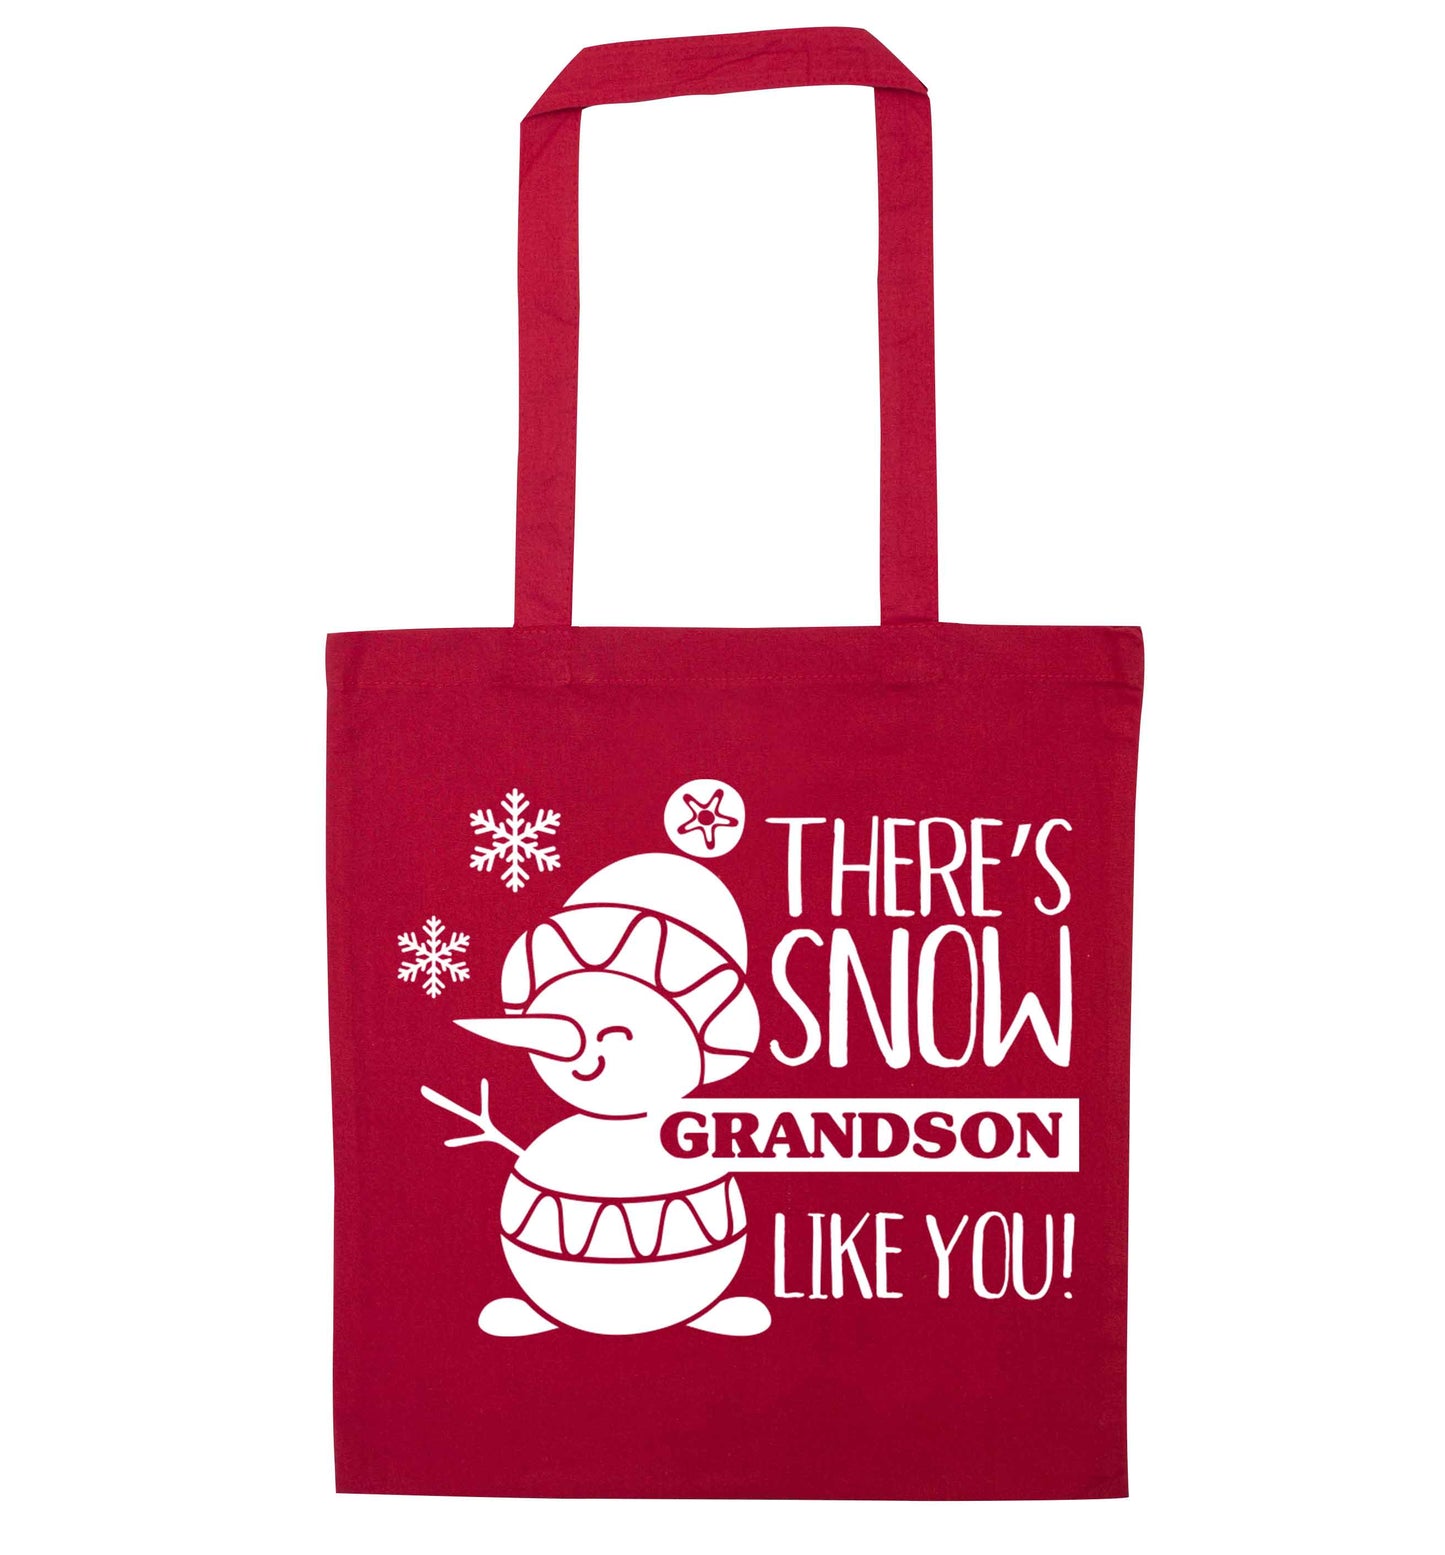 There's snow grandson like you red tote bag